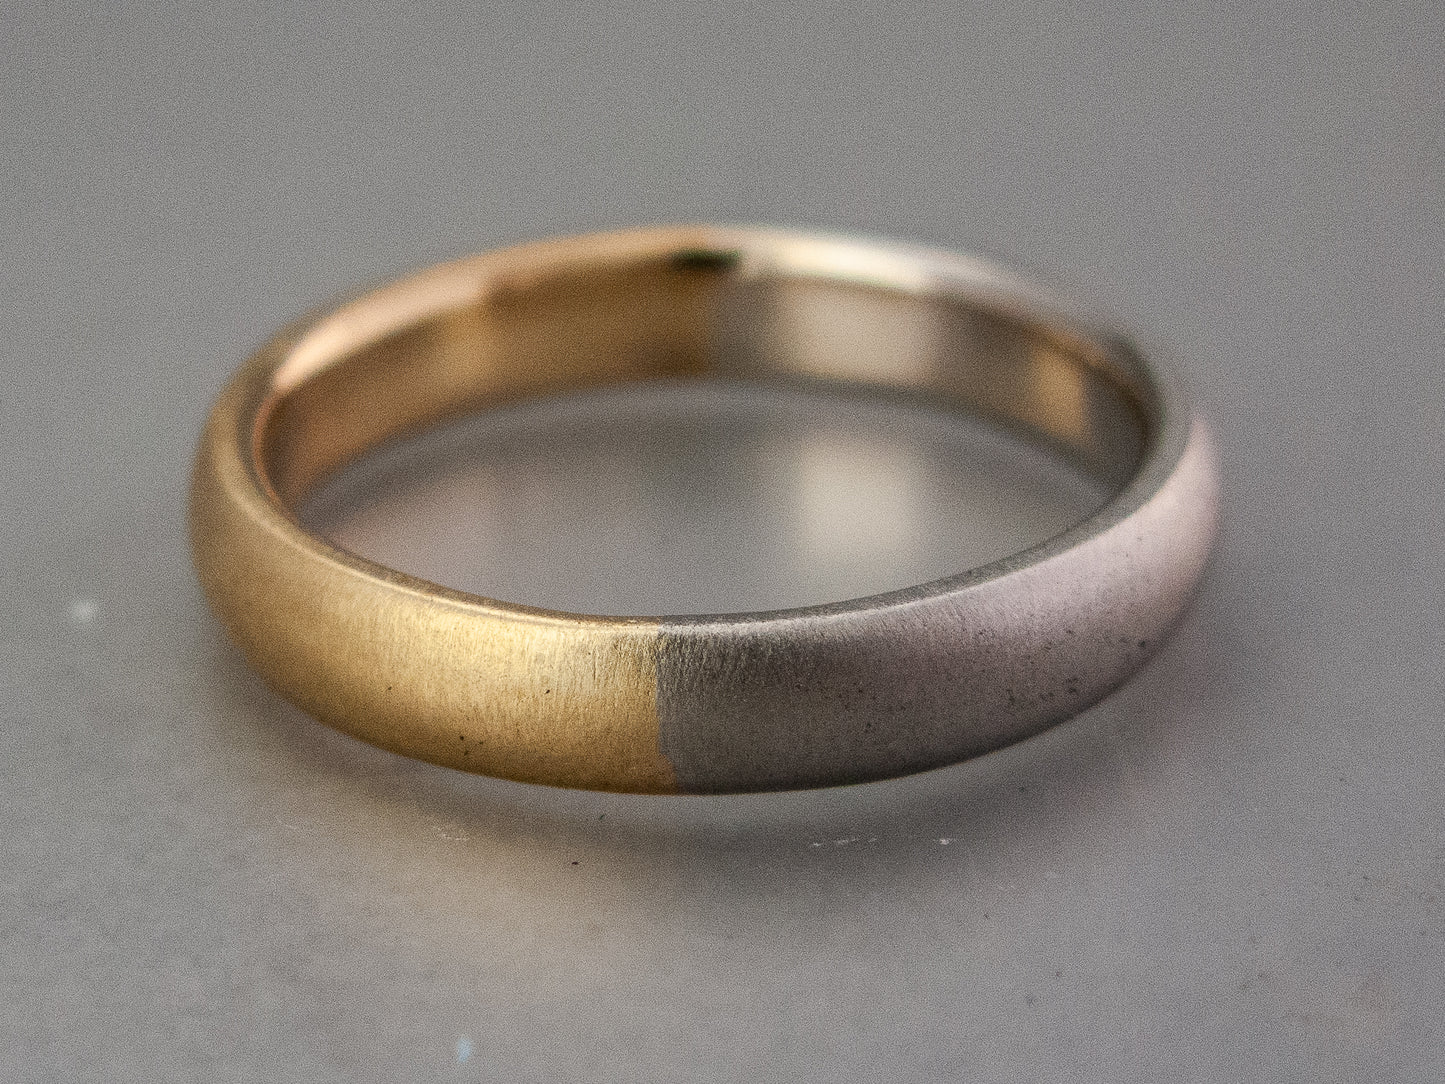 Platinum and 18k Yellow Gold Comfort Fit Wedding Ring | 4mm wide 50/50 Partnership in Mixed Precious Metals